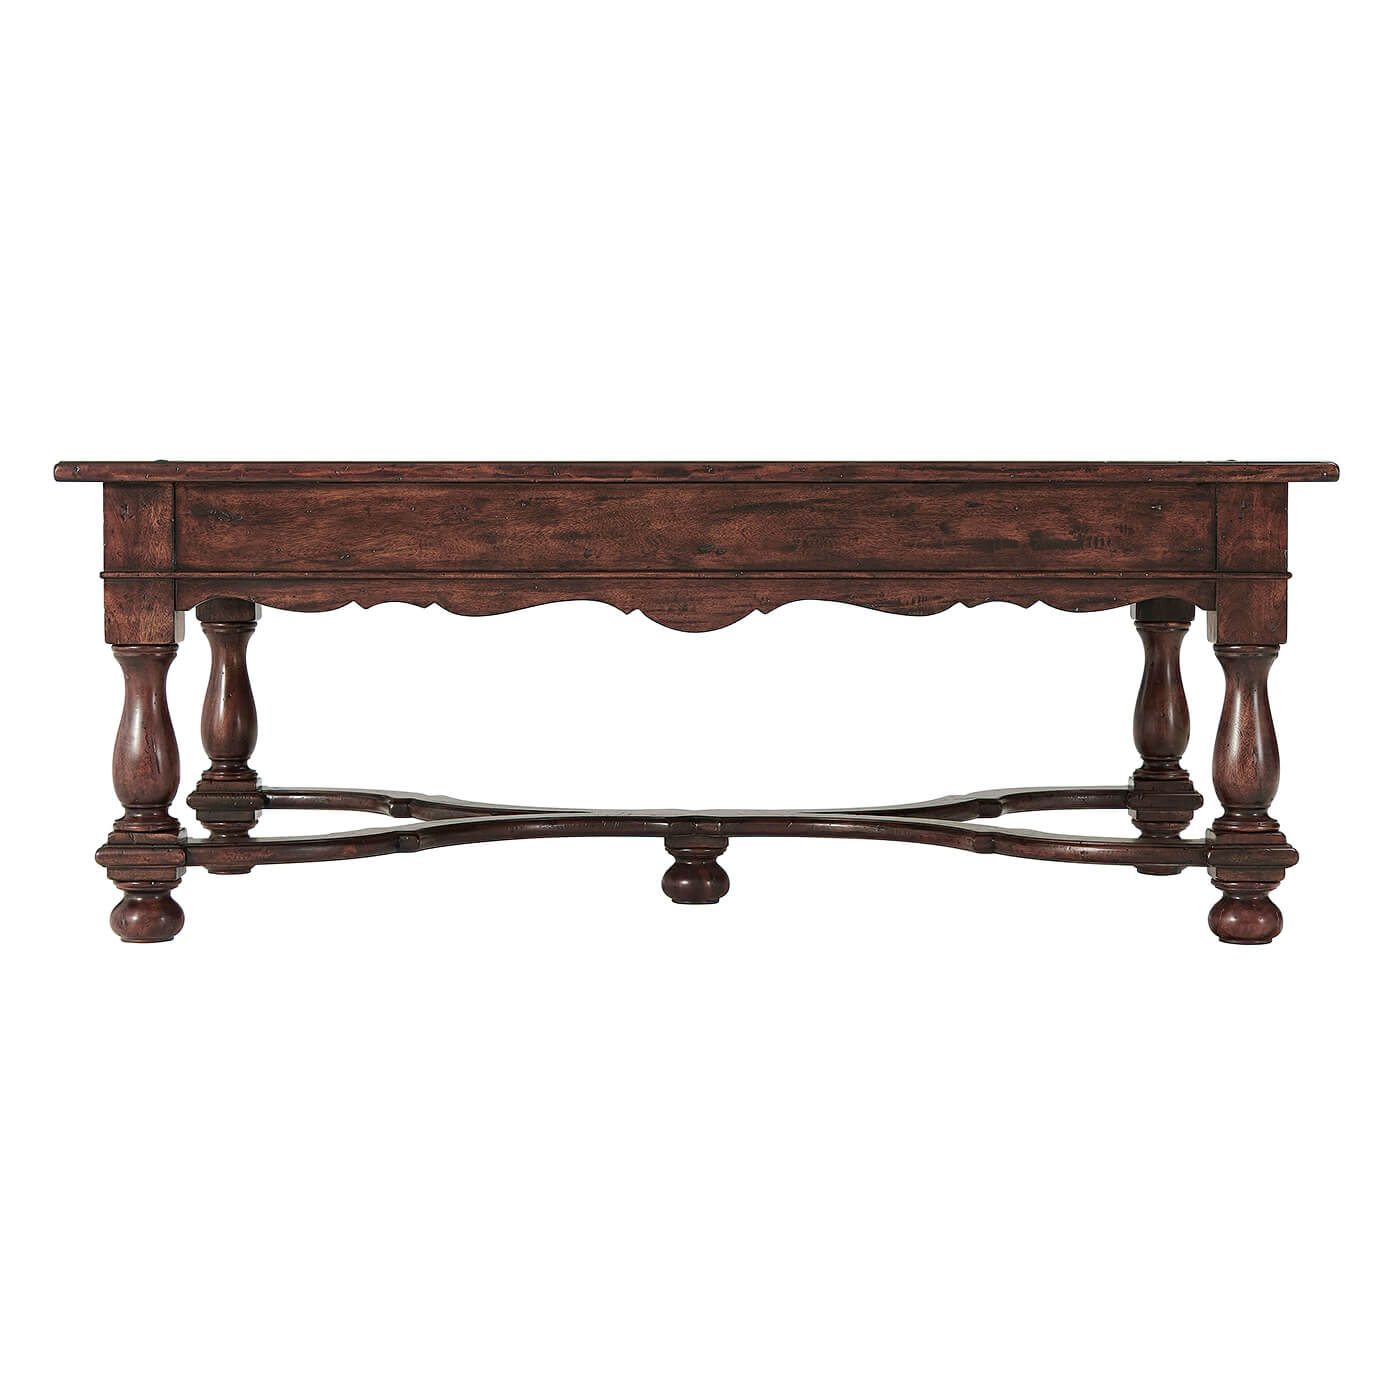 William and Mary Antiqued Coffee Table - English Georgian America